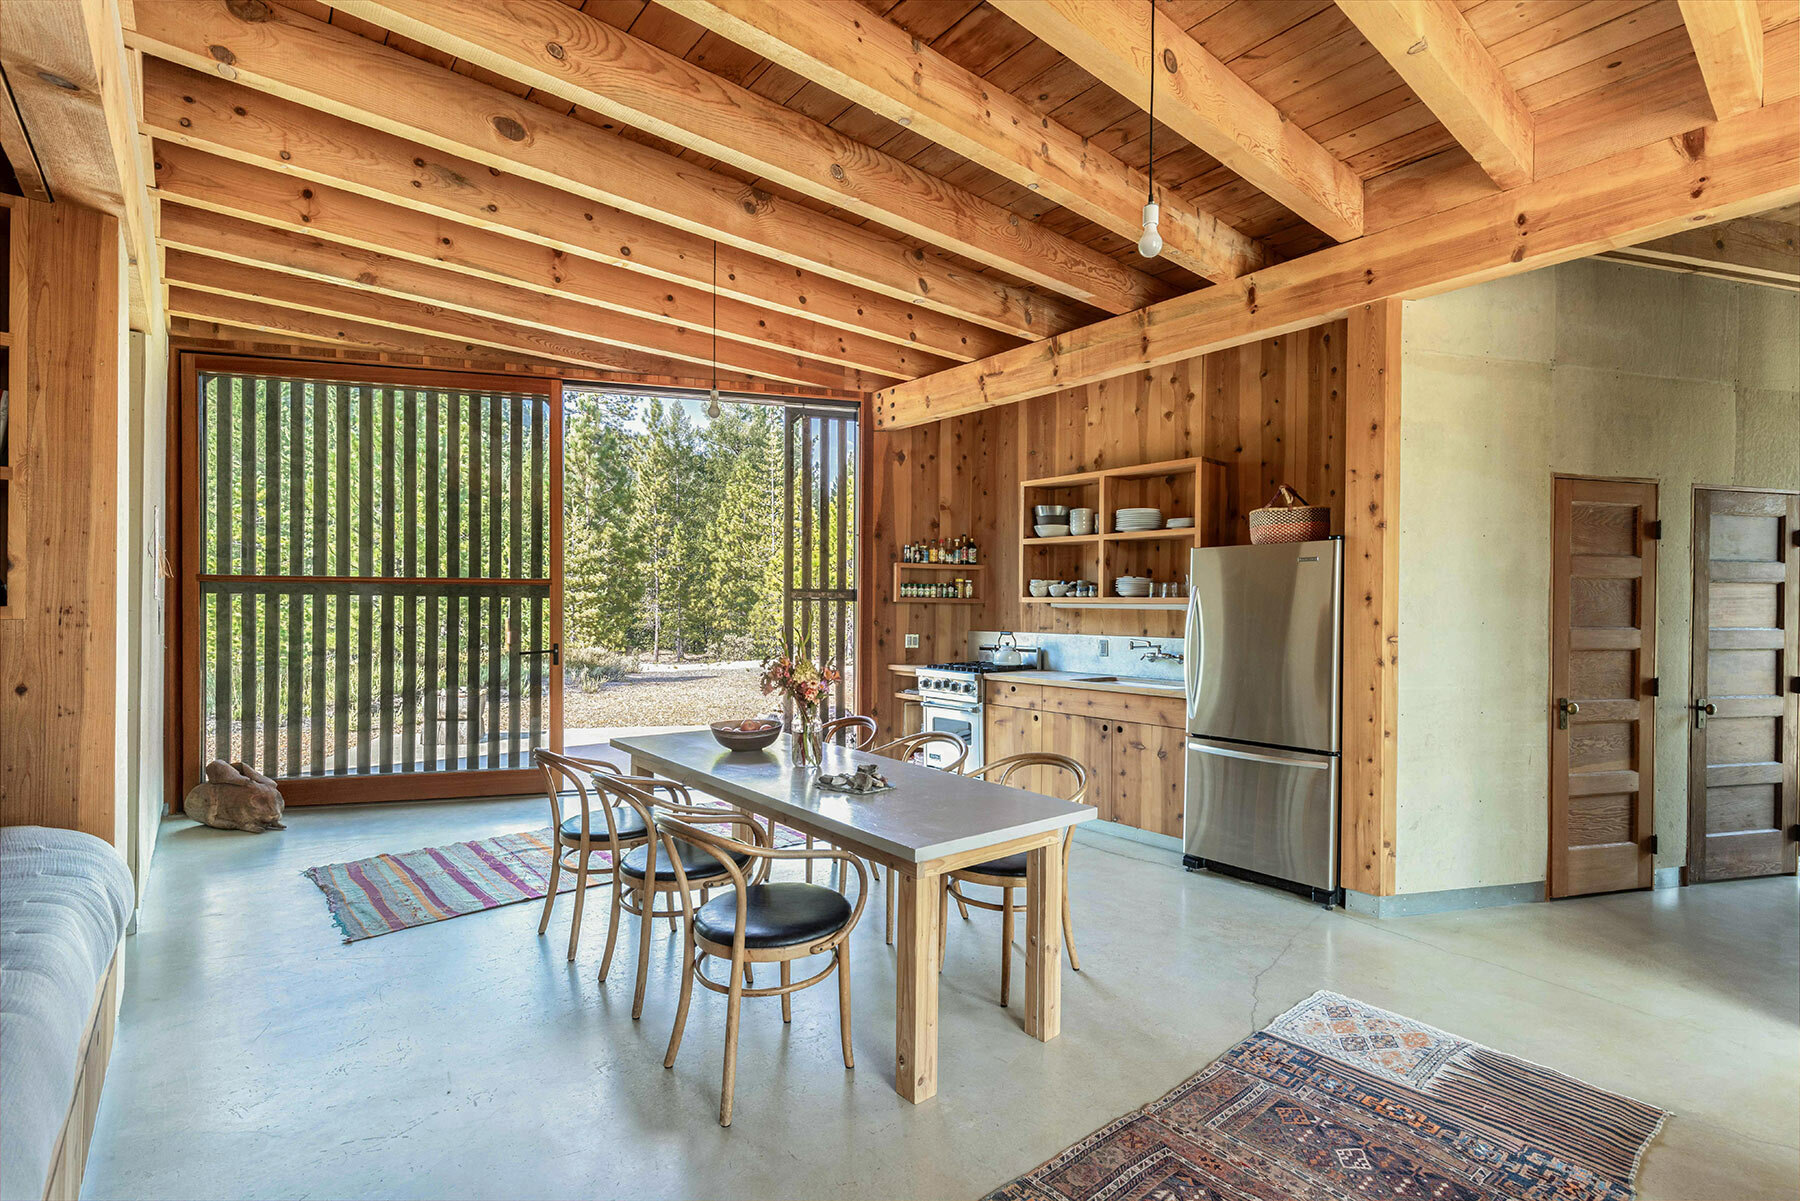 explore atelier bow-wow's only US home, california mountain house